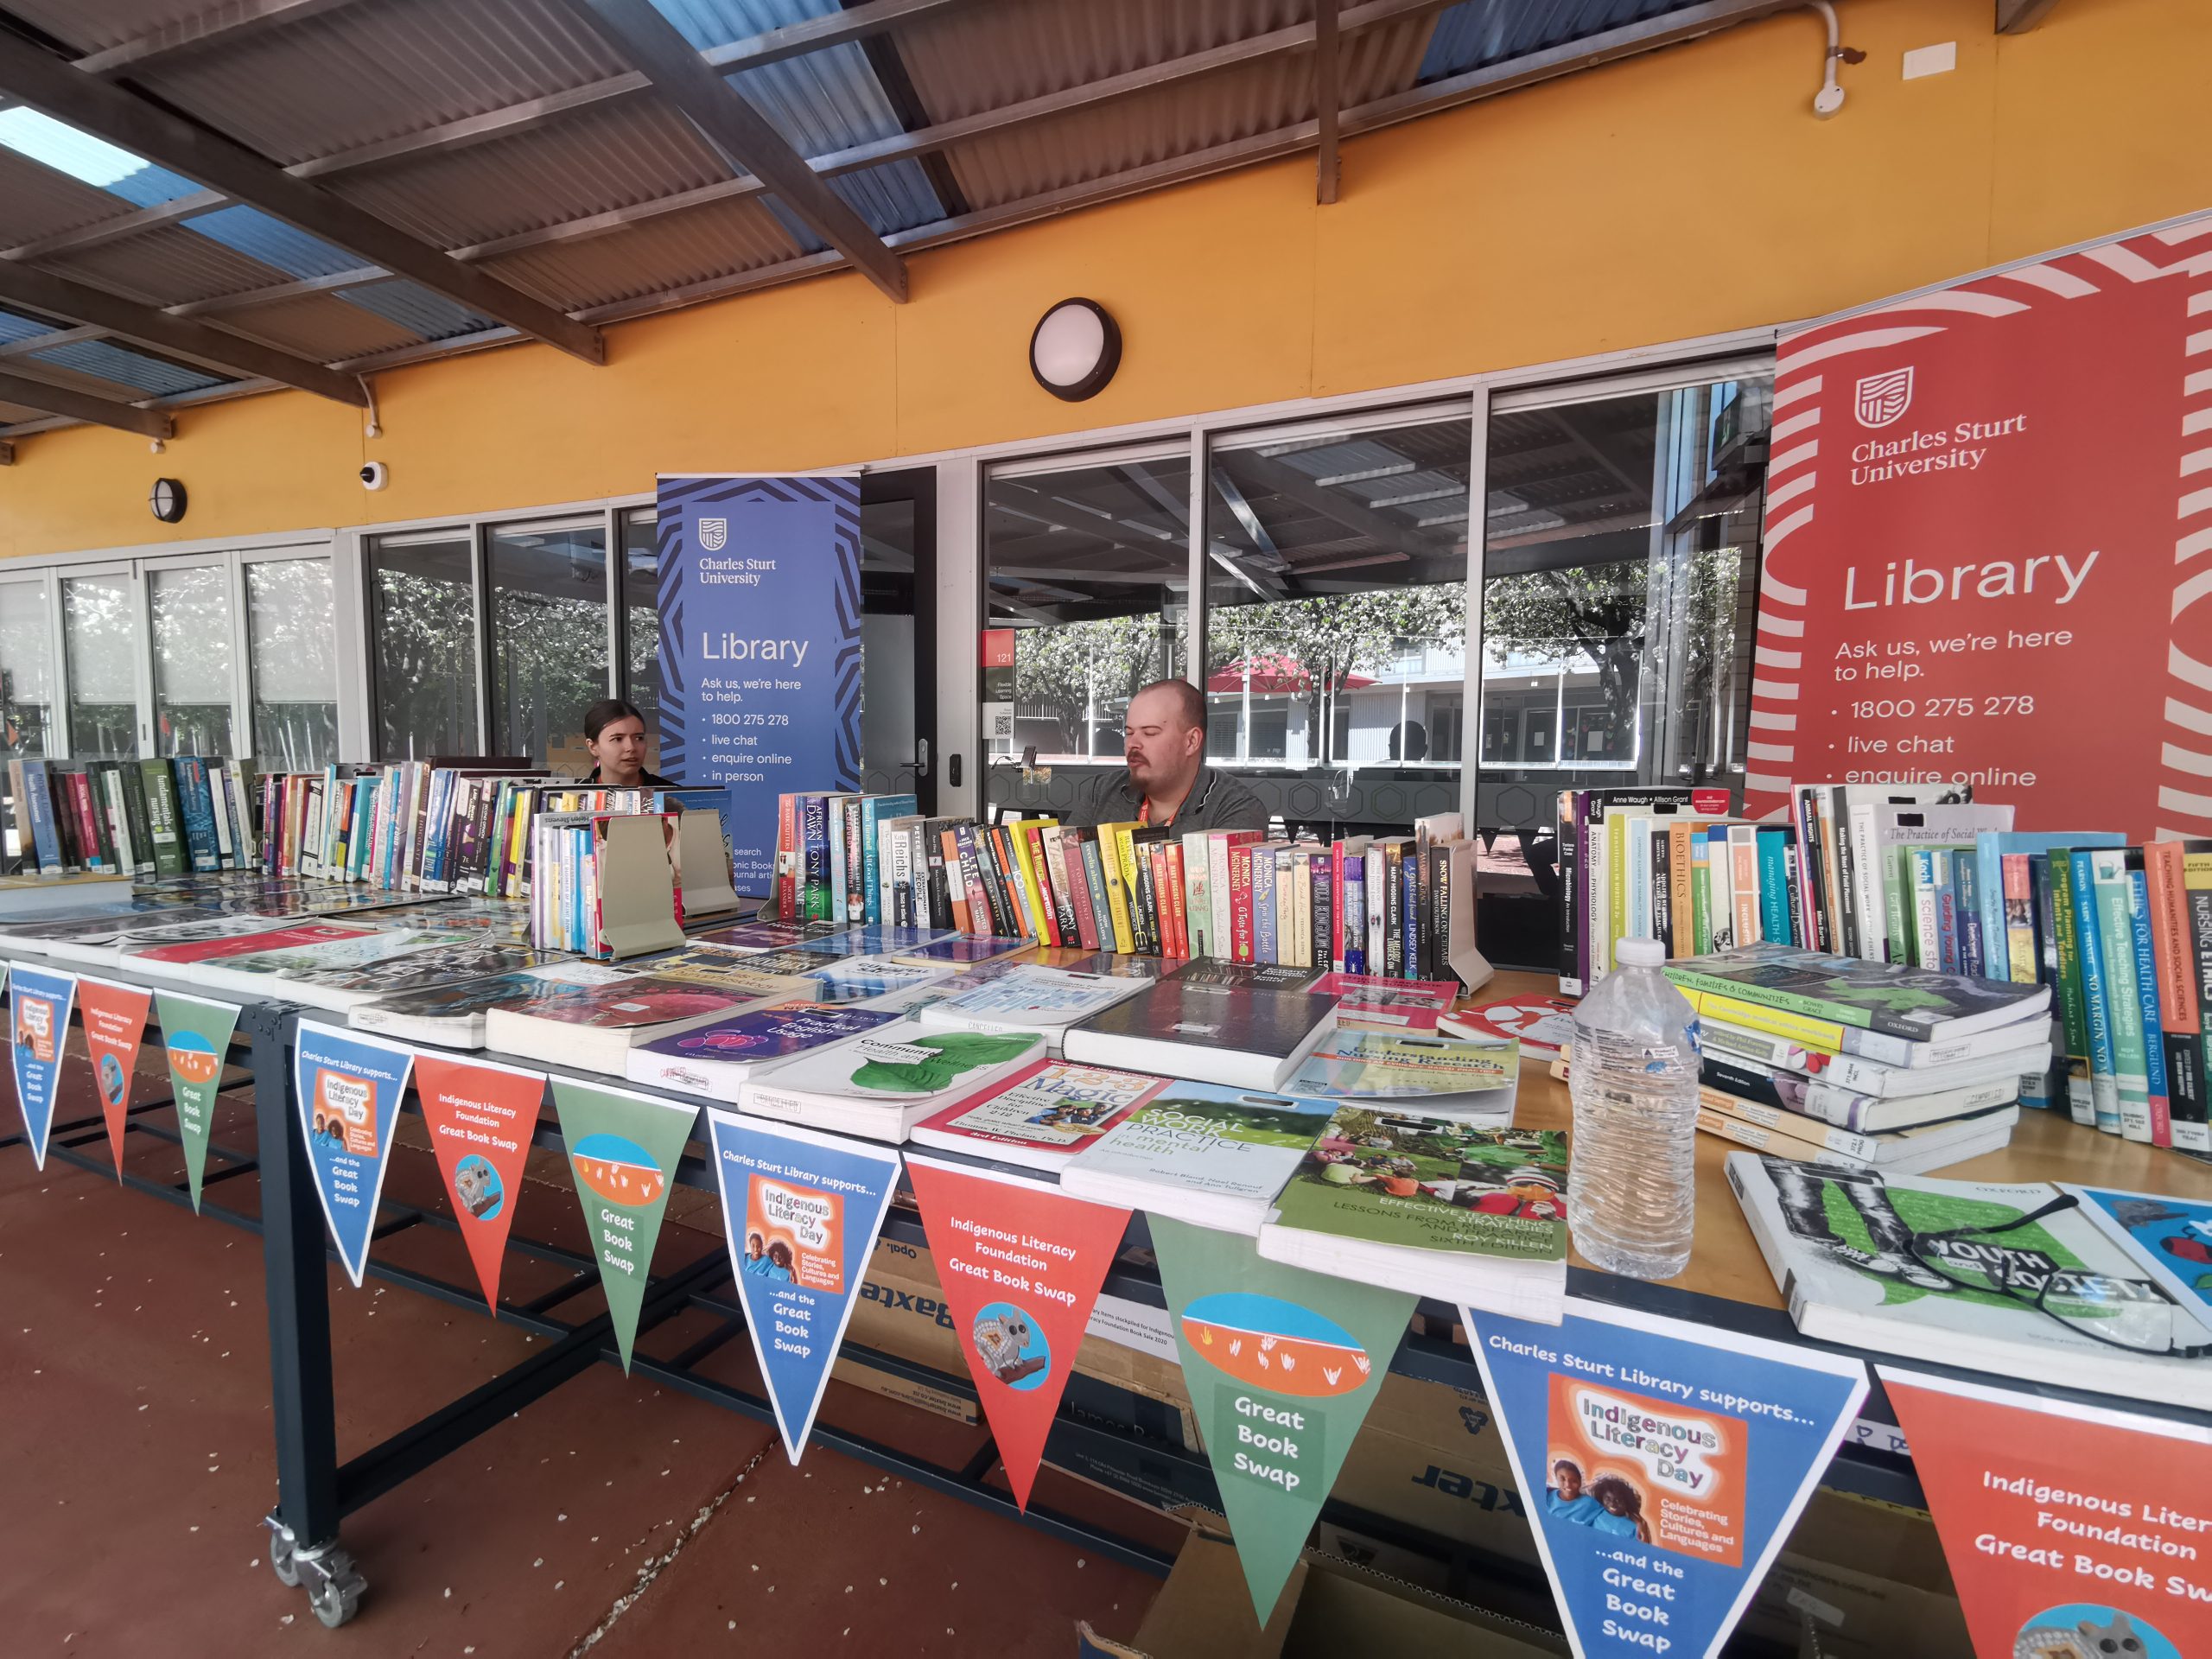 Library staff at the Great Book Swap stall in Dubbo. They are seated behind a large table filled with books.